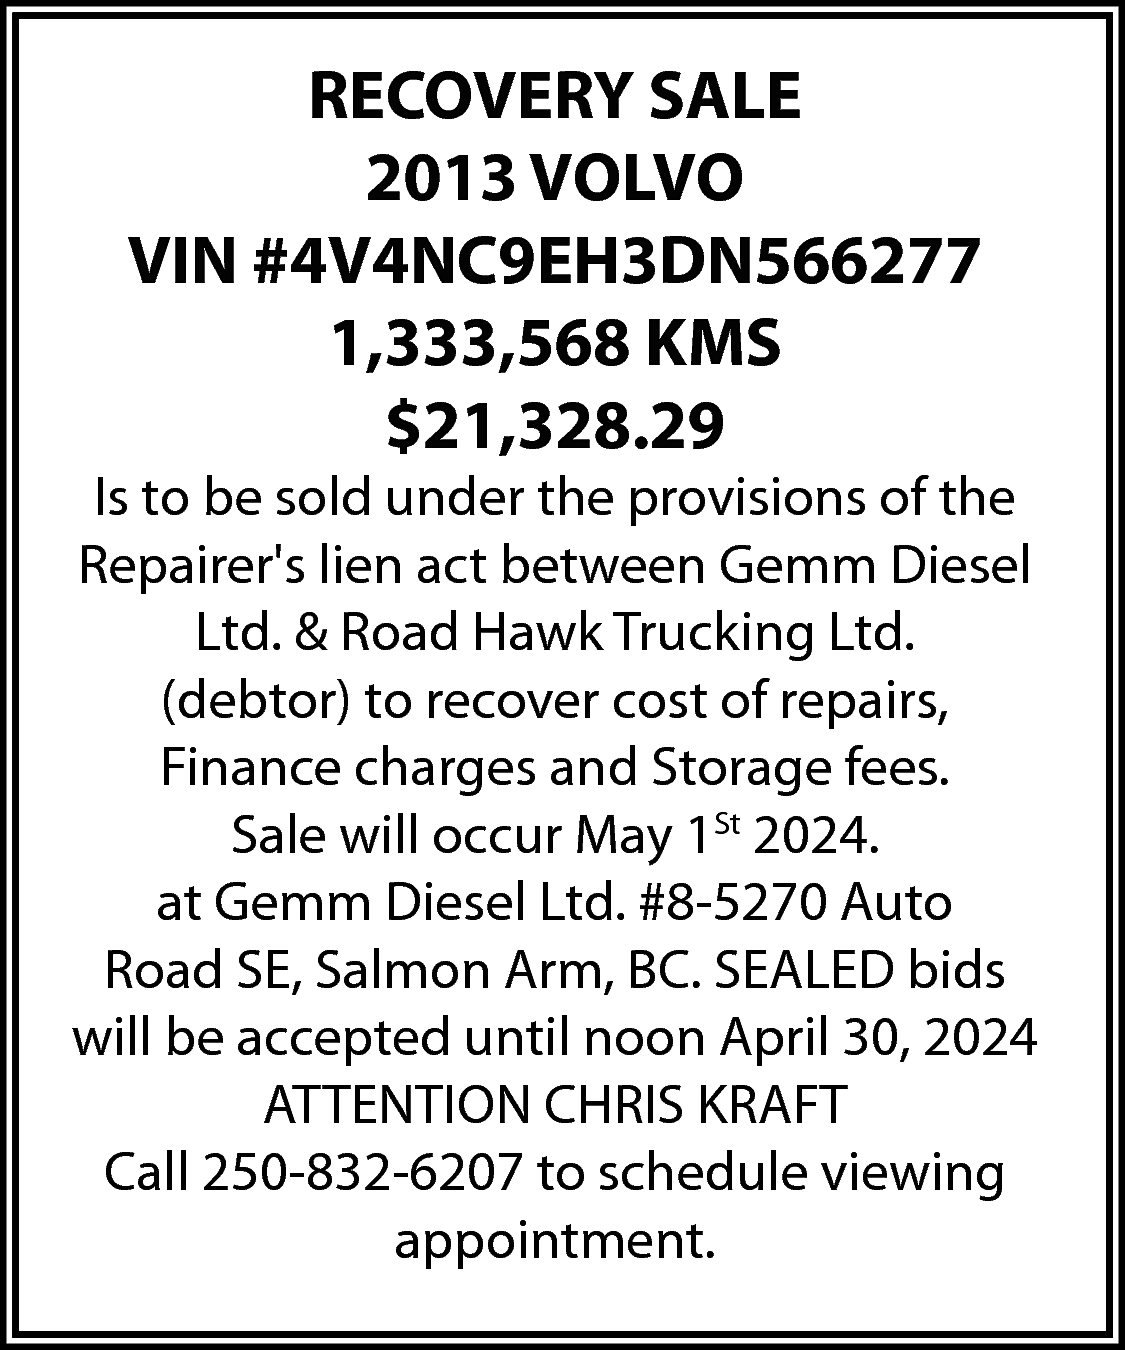 RECOVERY SALE <br>2013 VOLVO <br>VIN  RECOVERY SALE  2013 VOLVO  VIN #4V4NC9EH3DN566277  1,333,568 KMS  $21,328.29    Is to be sold under the provisions of the  Repairers lien act between Gemm Diesel  Ltd. & Road Hawk Trucking Ltd.  (debtor) to recover cost of repairs,  Finance charges and Storage fees.  Sale will occur May 1St 2024.  at Gemm Diesel Ltd. #8-5270 Auto  Road SE, Salmon Arm, BC. SEALED bids  will be accepted until noon April 30, 2024  ATTENTION CHRIS KRAFT  Call 250-832-6207 to schedule viewing  appointment.    